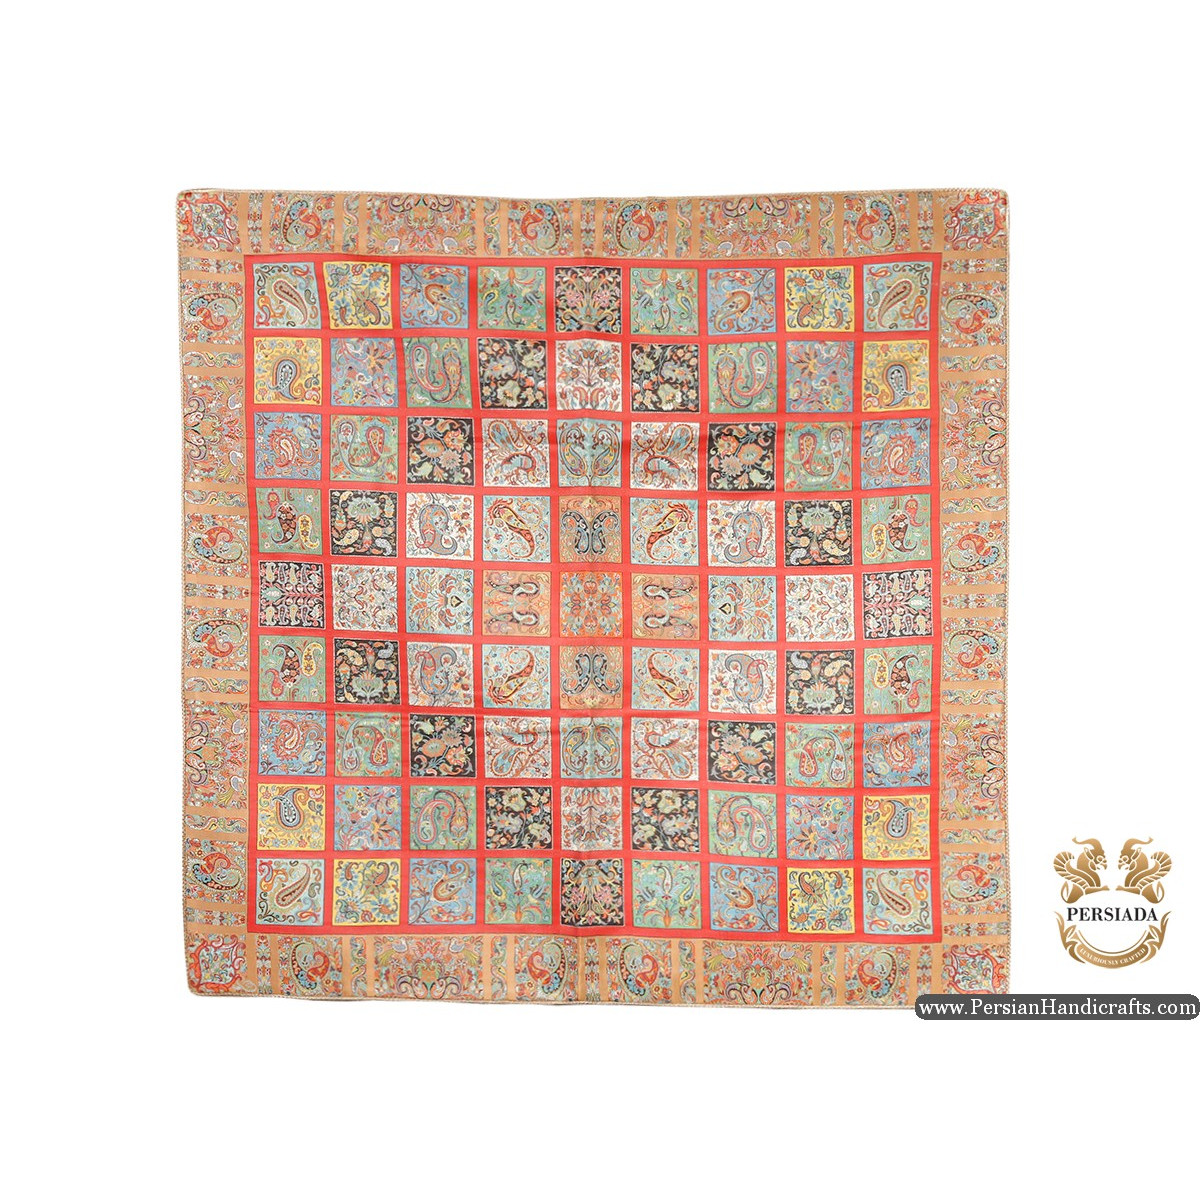 Square Tablecloth | Hand-Woven Termeh | Persiada HT6104